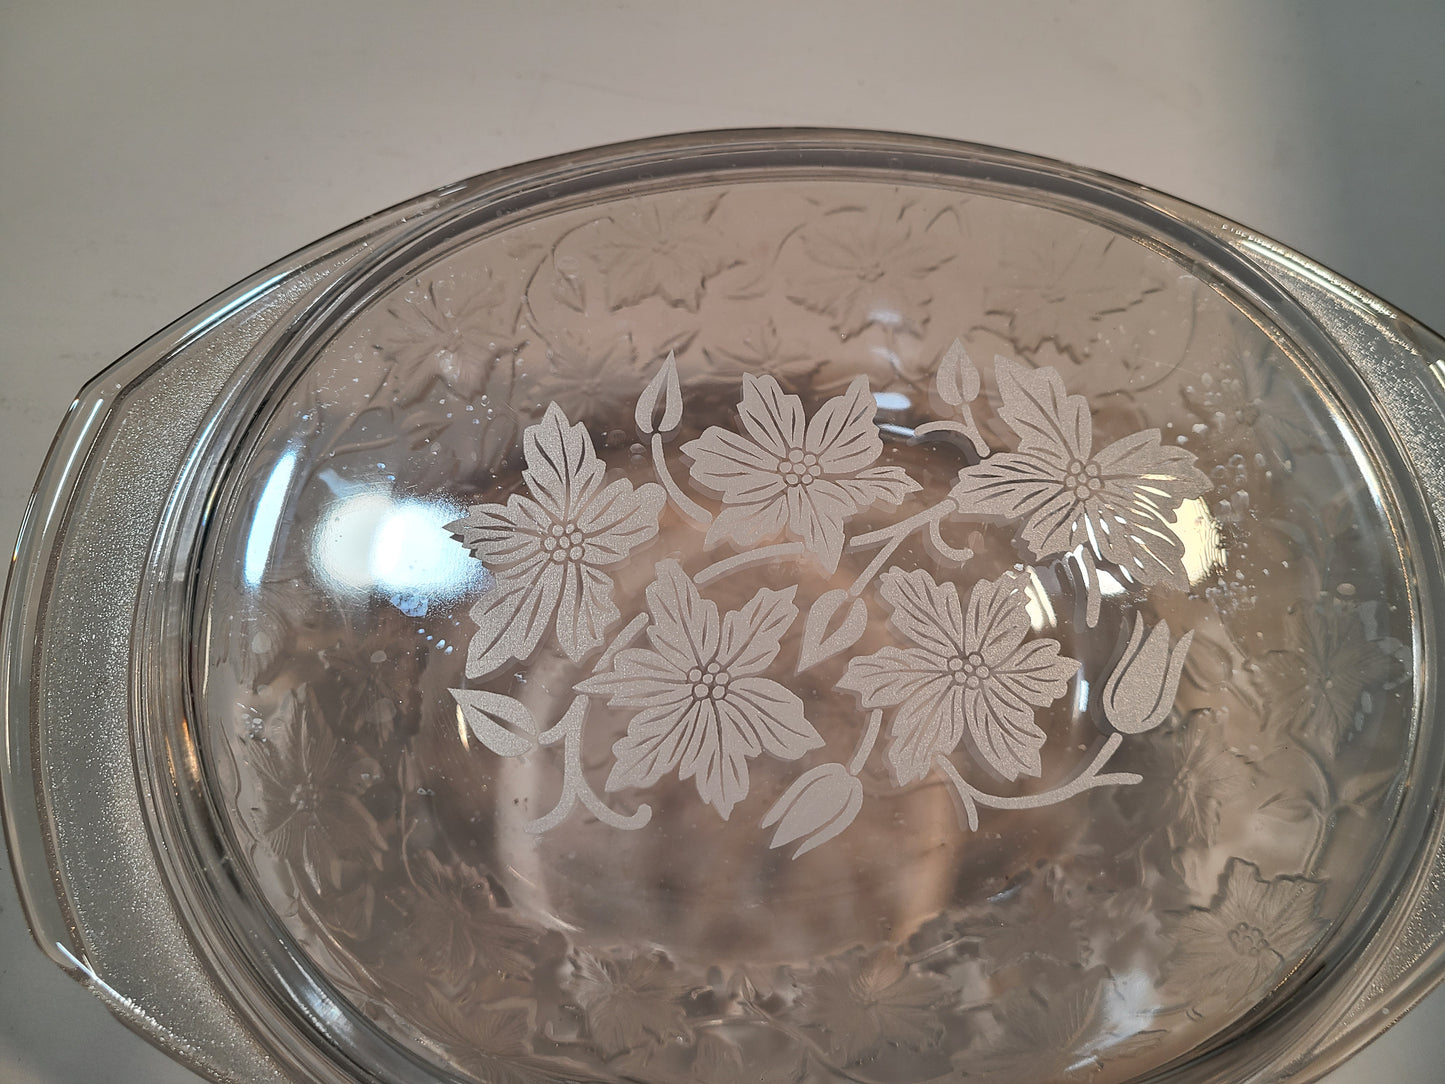 Etched Glass casserole serving dish